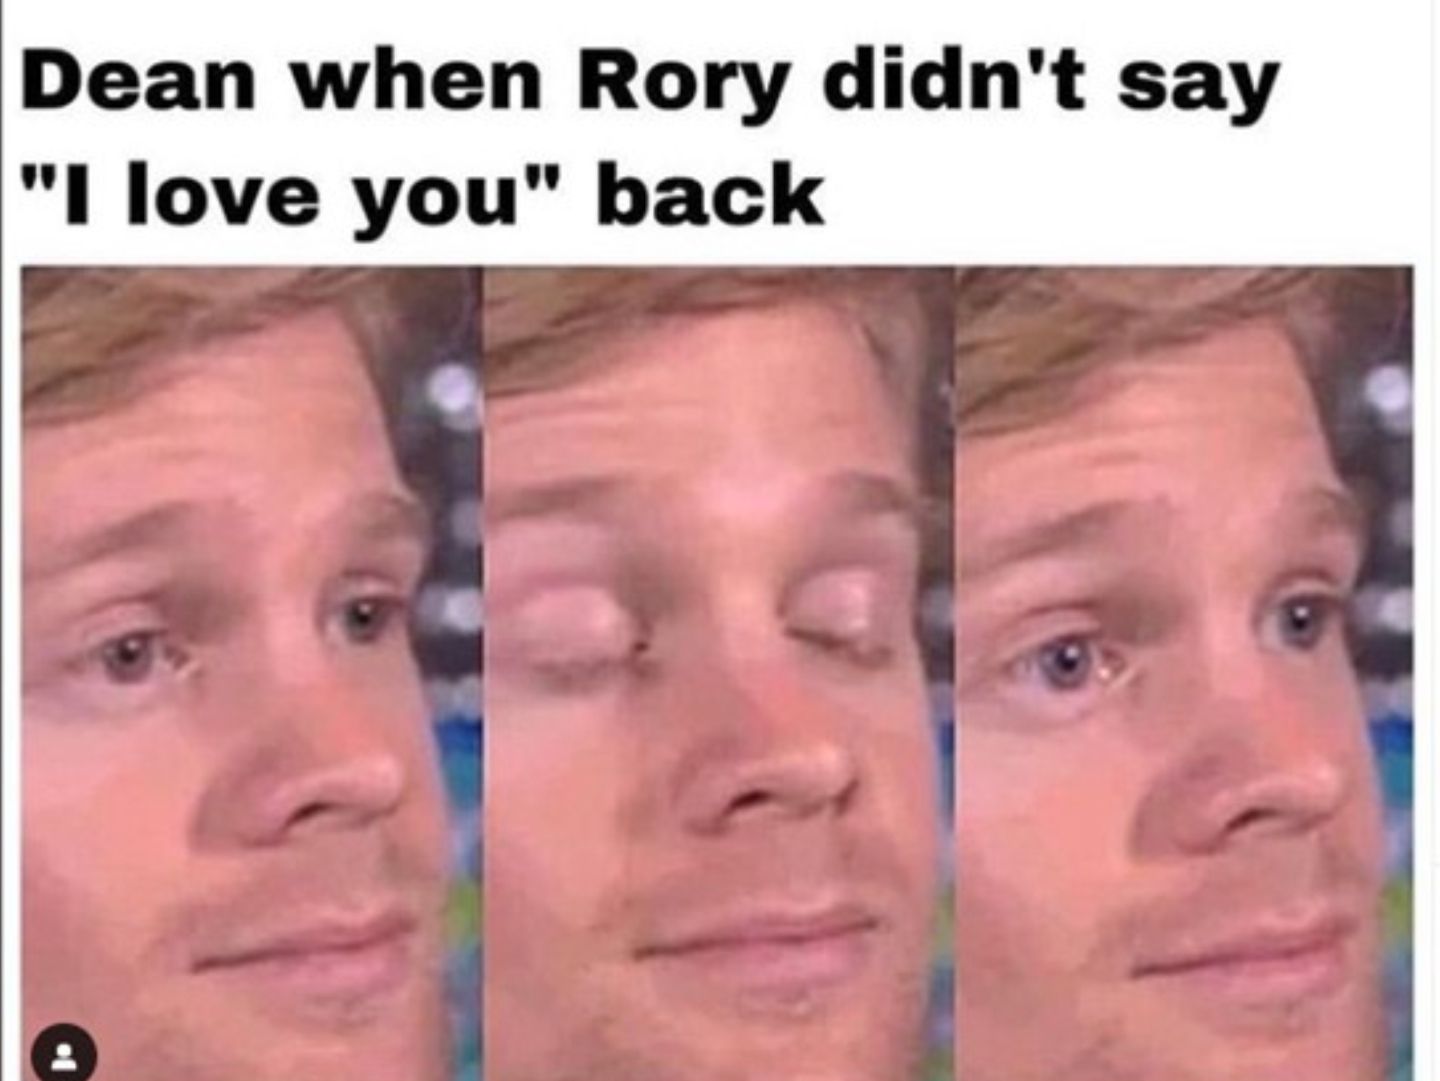 Meme about Dean being upset Rory didn't say I love you back in Gilmore Girls. 